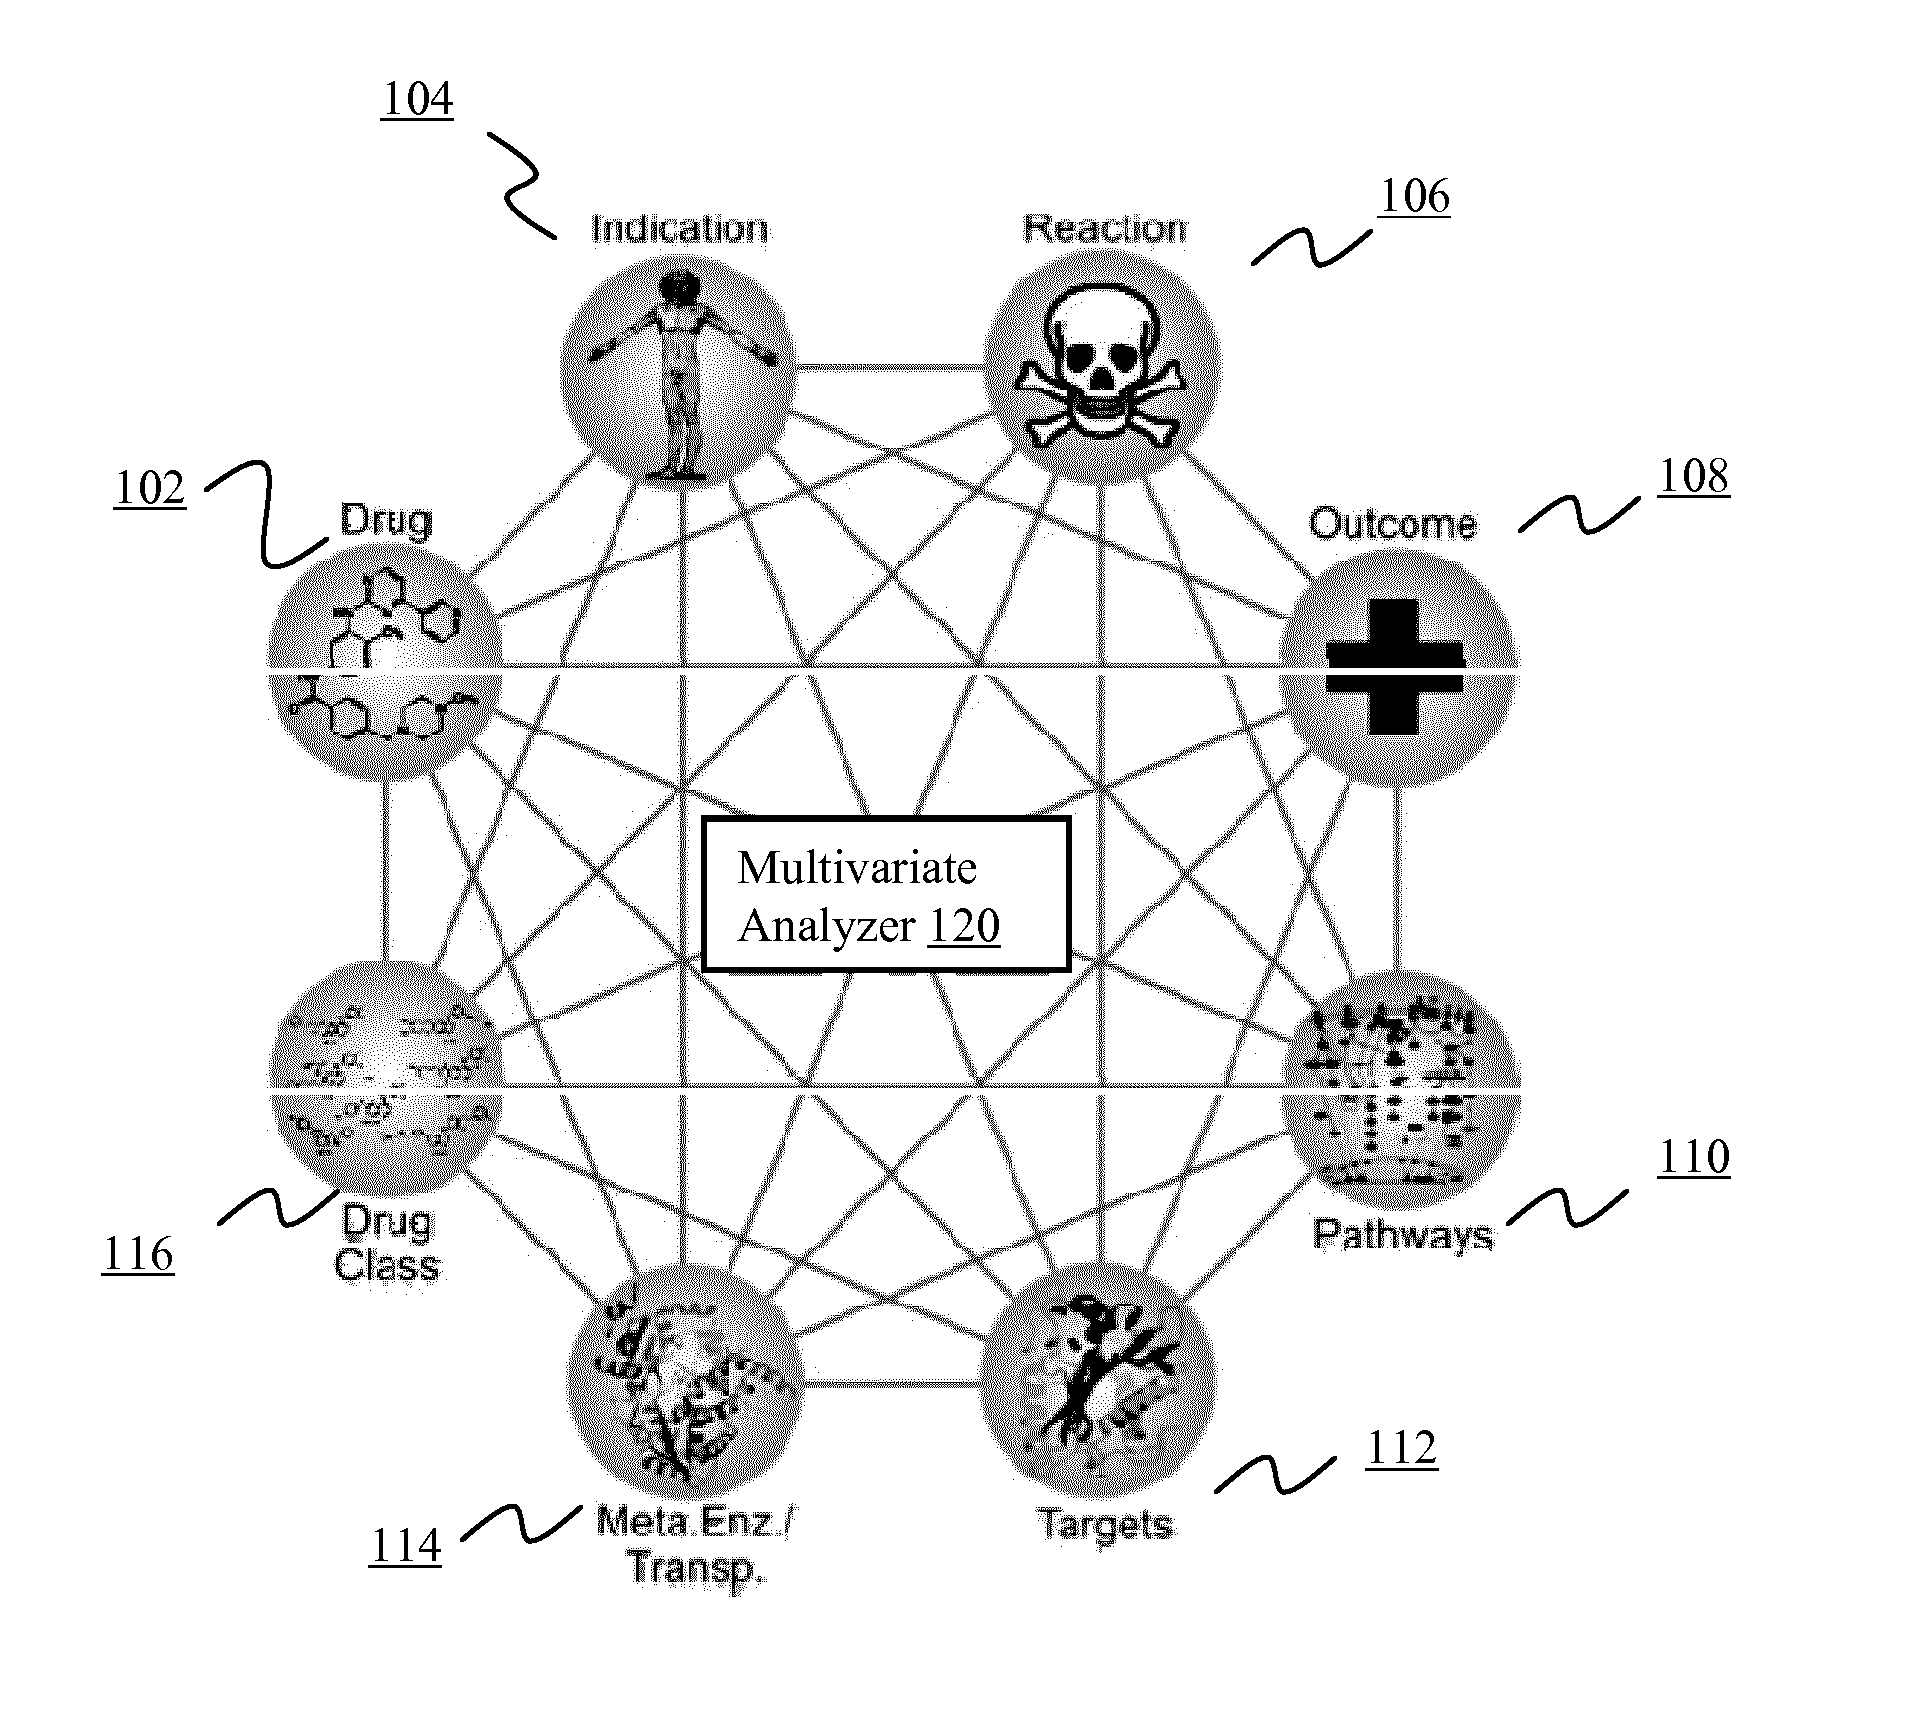 Systems and methods for multivariate analysis of adverse event data